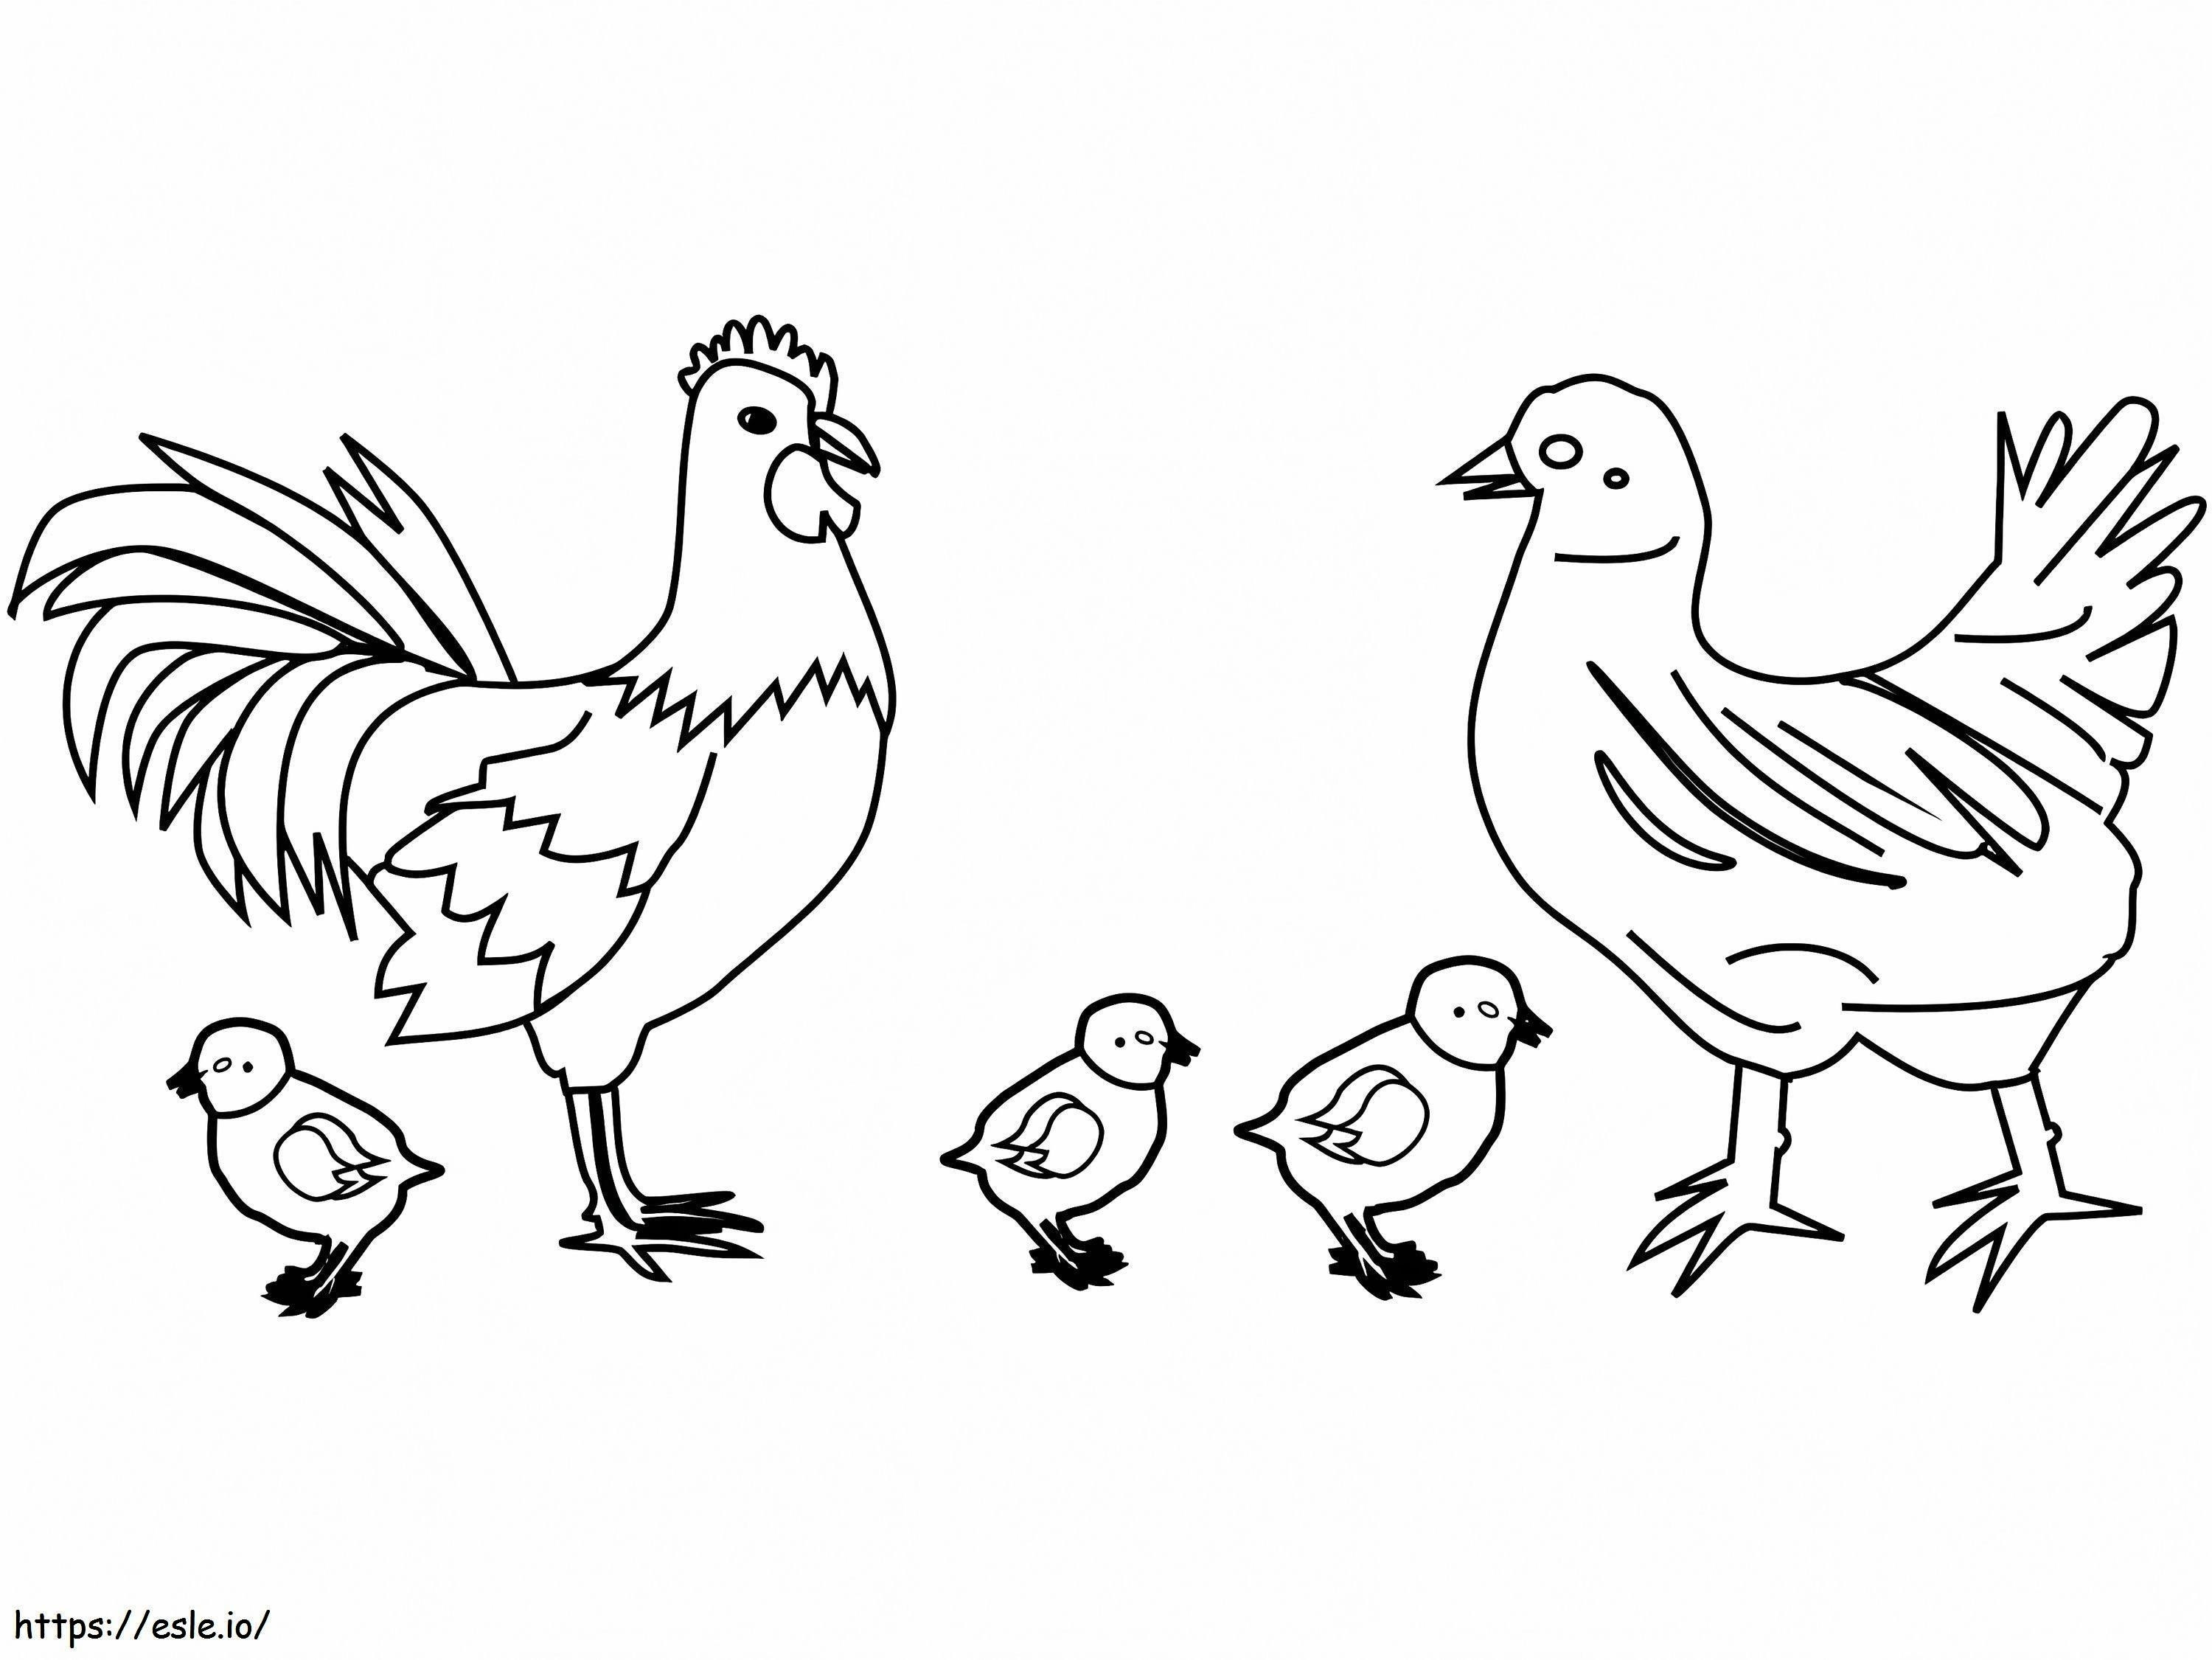 Chicken Family coloring page